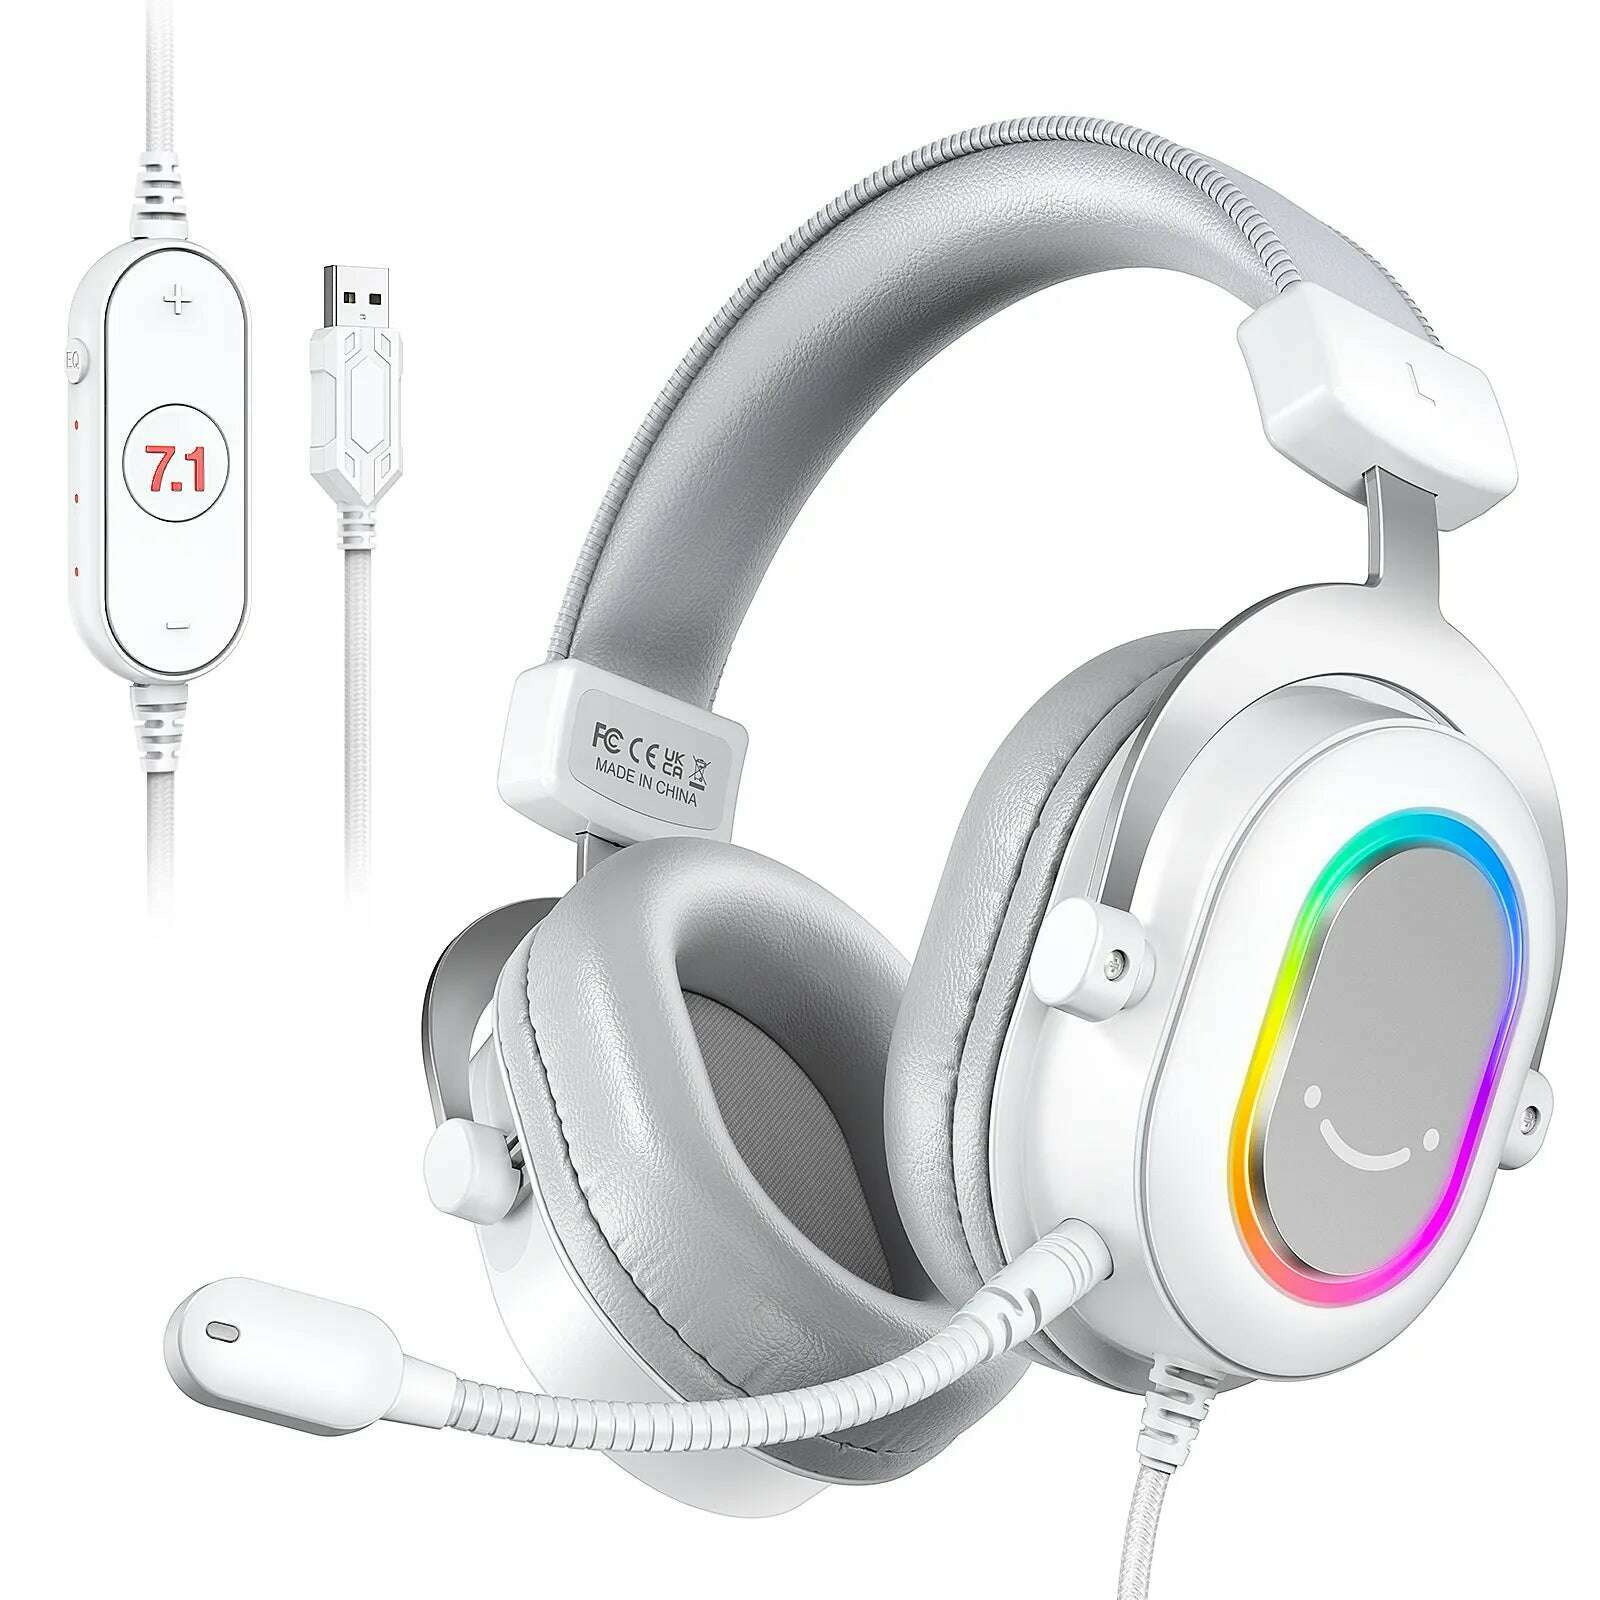 FIFINE RGB Gaming Headset with 7.1 Surround Sound/3-EQ/MIC,Over-ear Headphone with In-line Control for PC PS4 PS5 Ampligame-H6W, WHITE, KIMLUD Women's Clothes